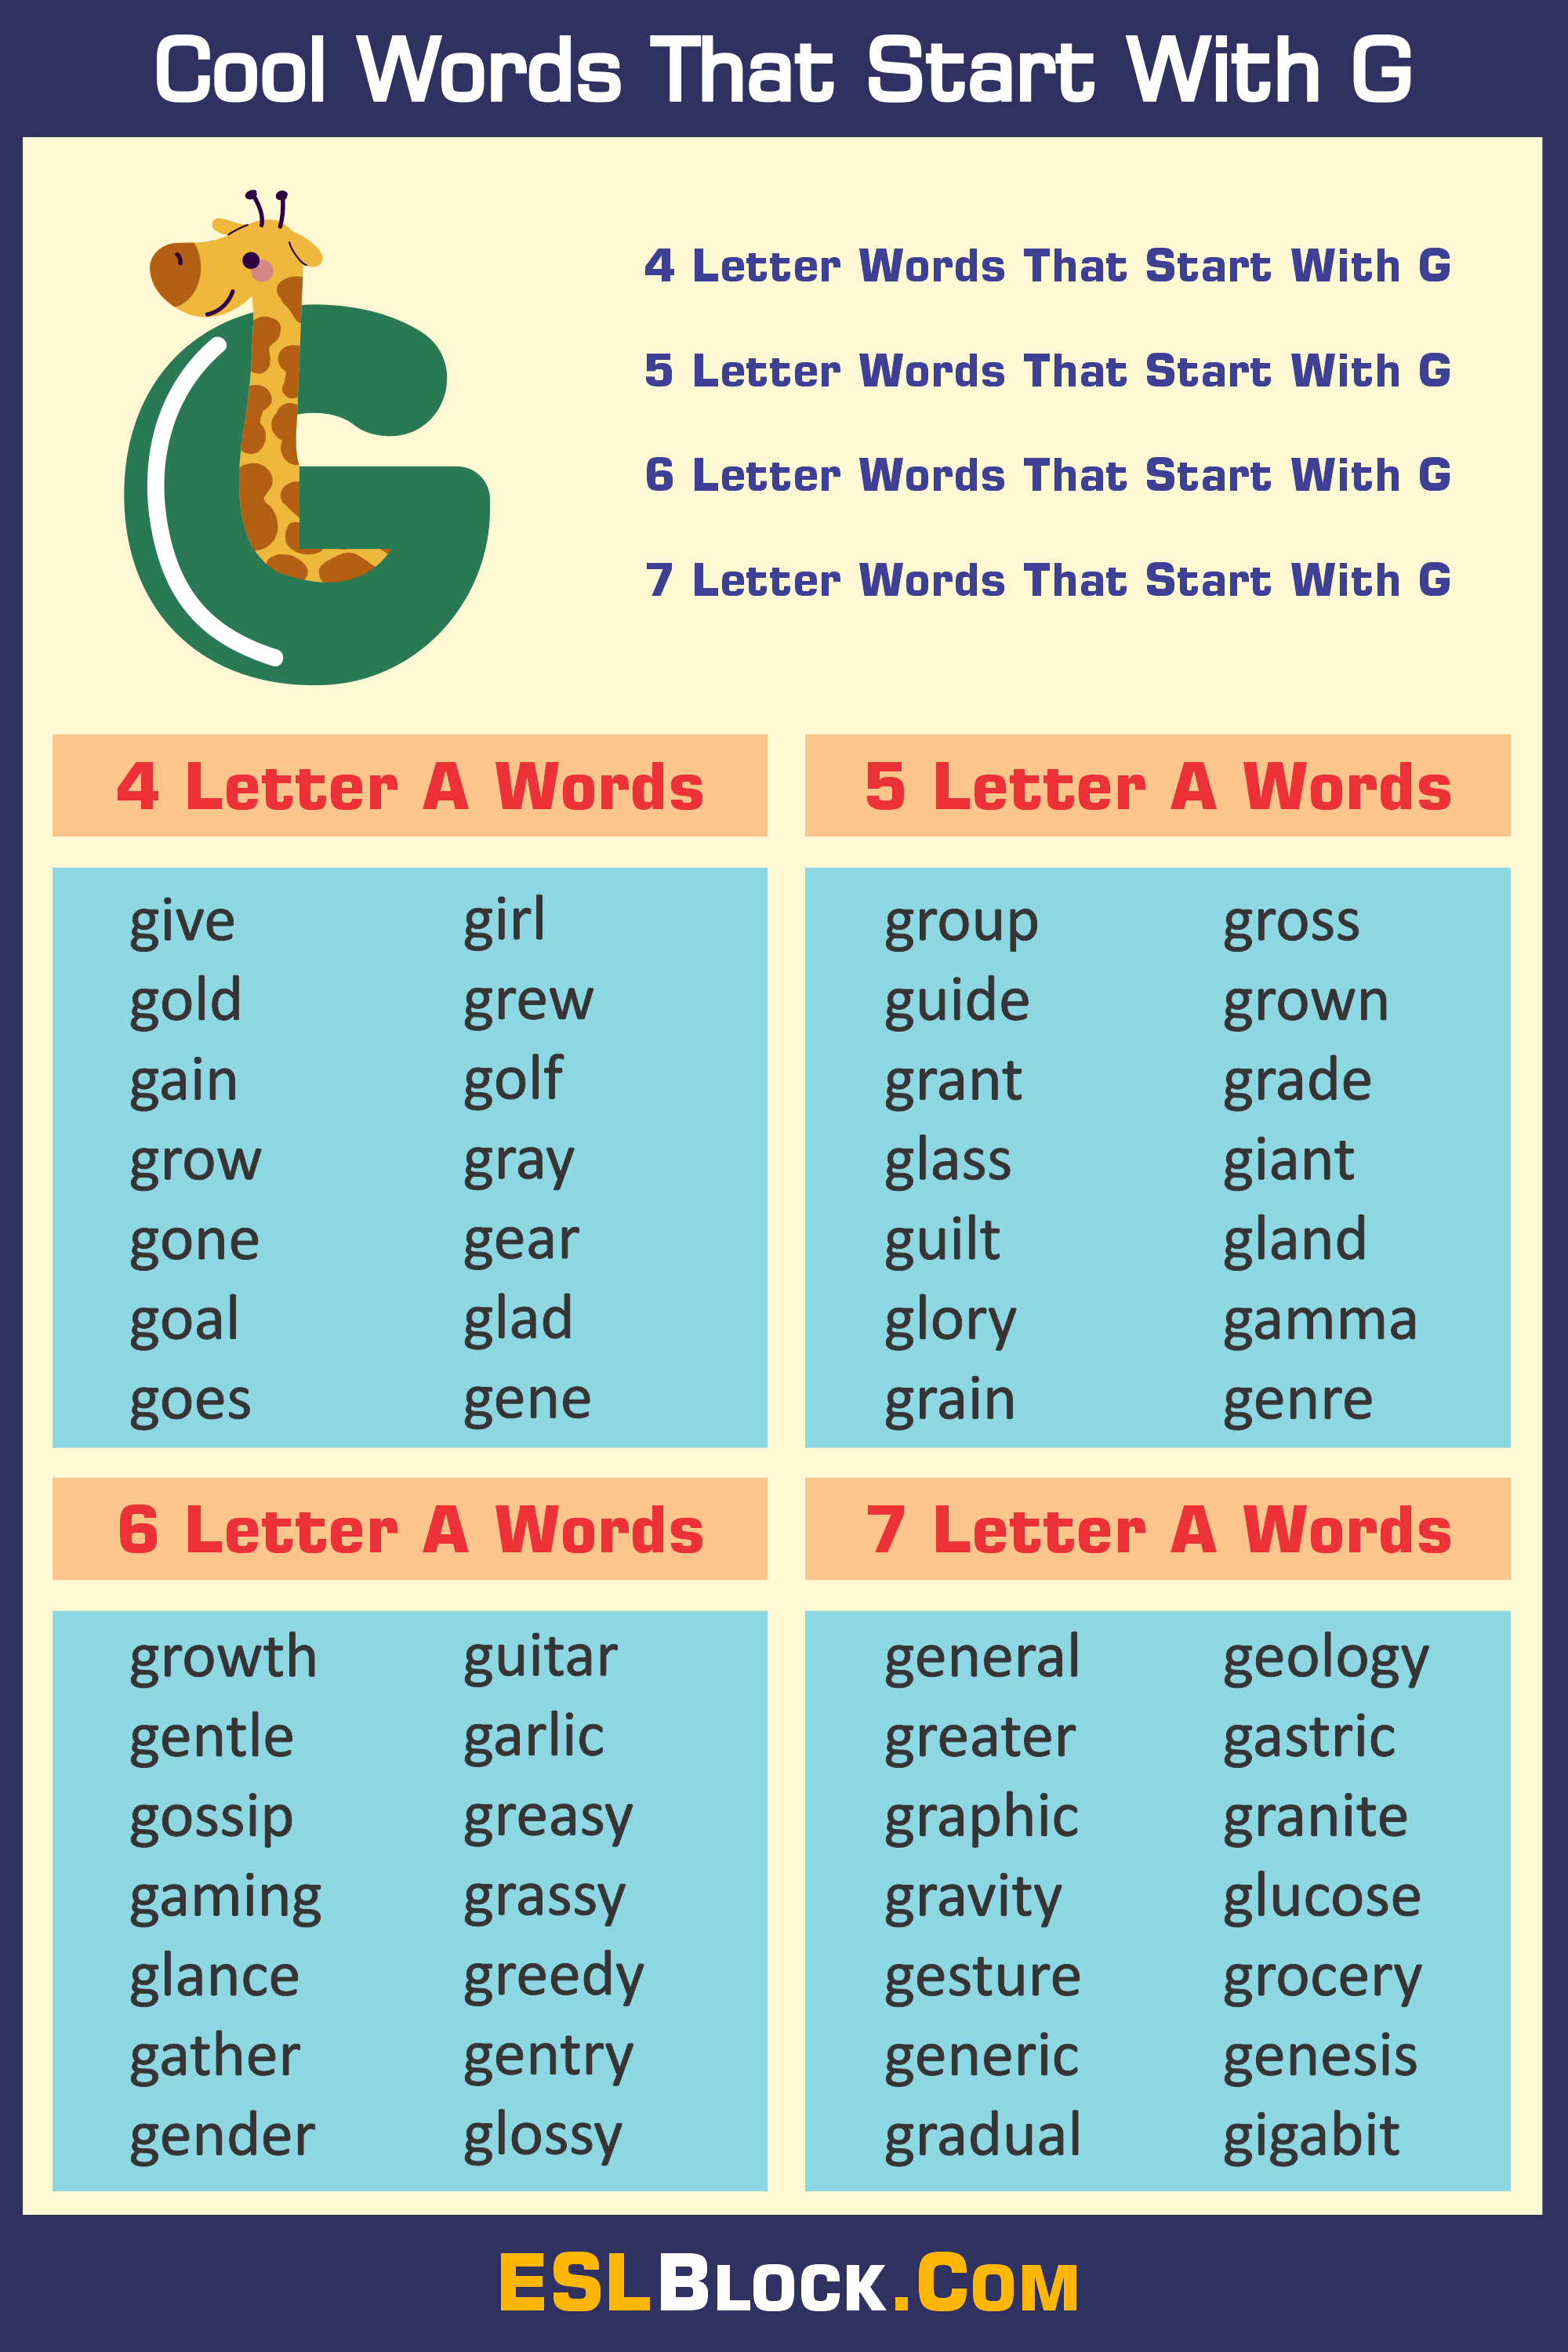 4 Letter Words, 4 Letter Words That Start With G, 5 Letter Words, 5 Letter Words That Start With G, 6 Letter Words, 6 Letter Words That Start With G, 7 Letter Words, 7 Letter Words That Start With G, Awesome Cool Words, Christmas Words That Start With G, Cool Words, Describing Words That Start With G, Descriptive Words That Start With G, English Words, Five Letter Words Starting with G, G Words, Good Words That Start With G, Nice Words That Start With G, Positive Words That Start With G, Unique Words, Word Dictionary, Words That Start With G, Words That Start With G to Describe Someone